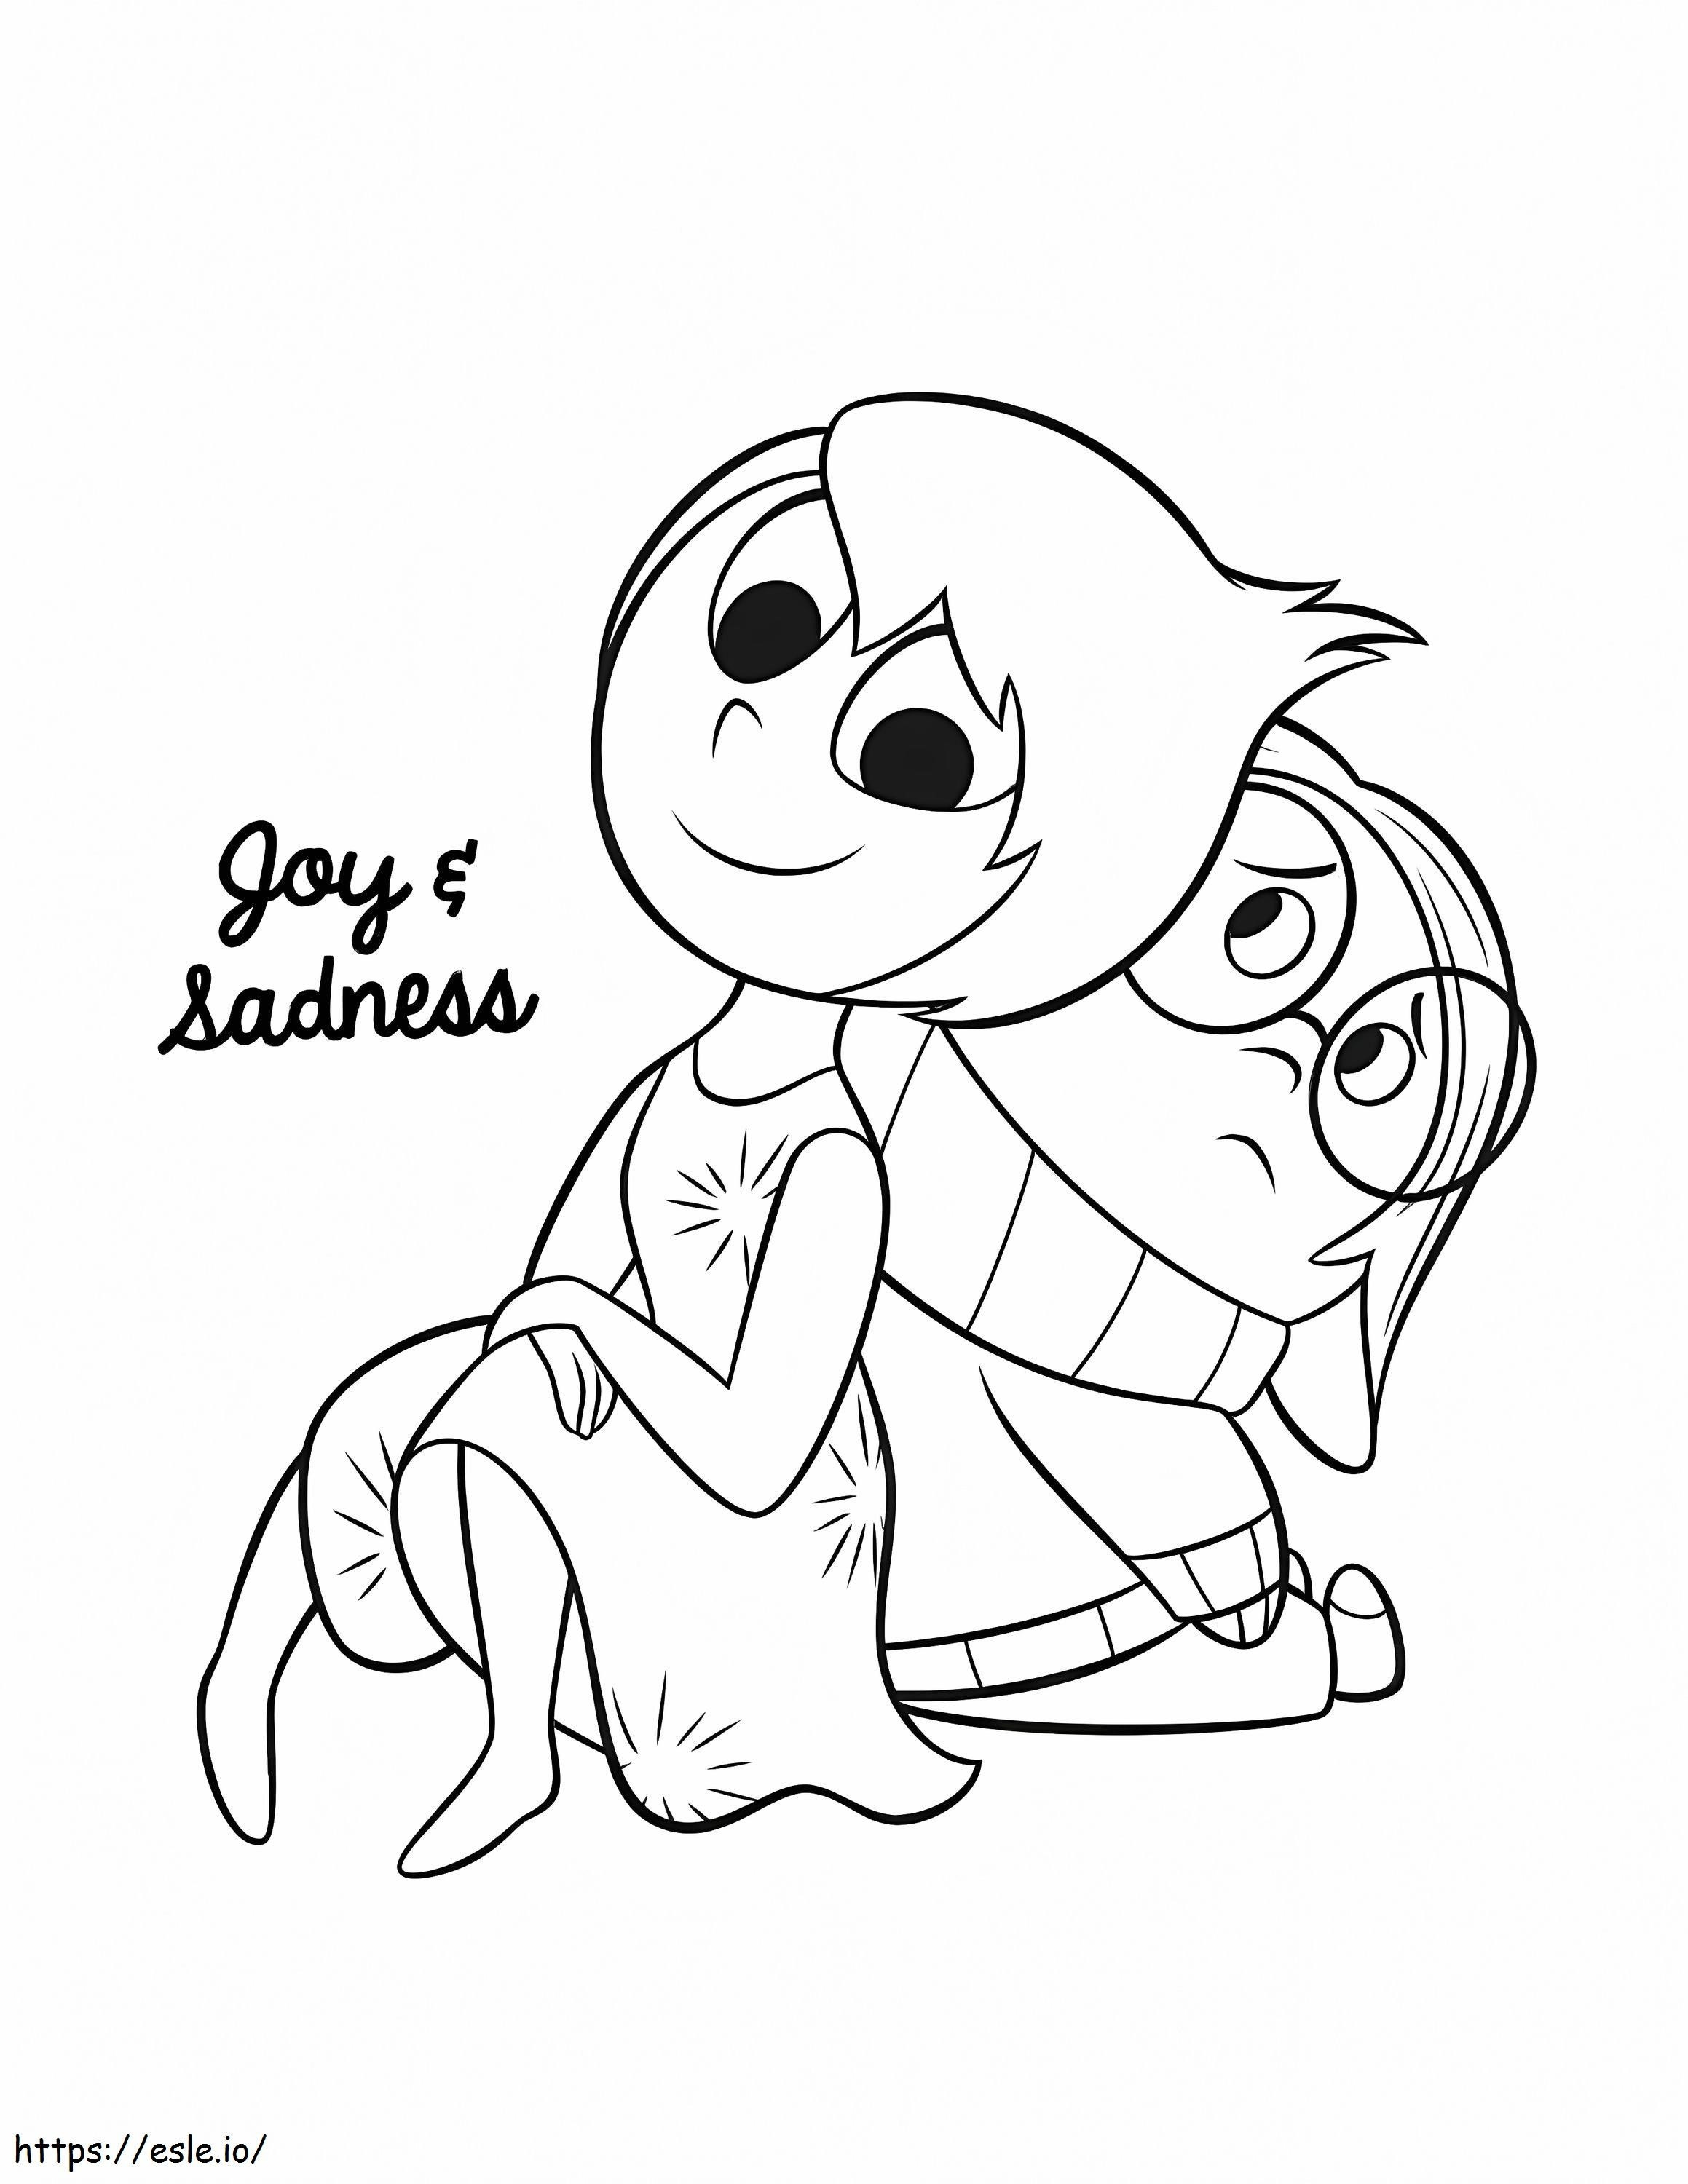 Sadness And Joy coloring page